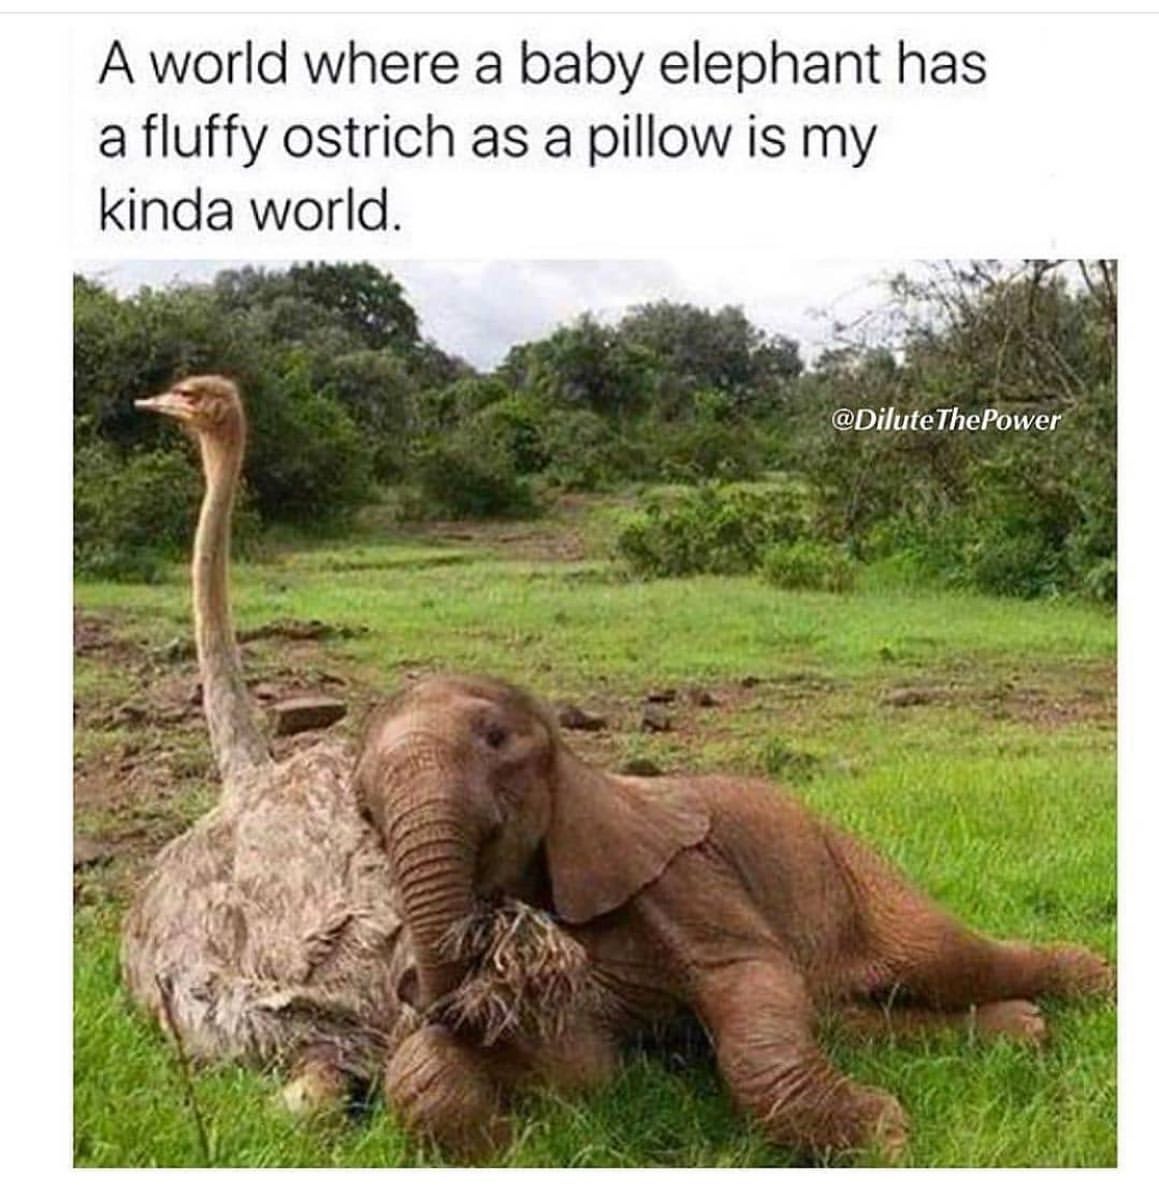 A world where a baby elephant has a fluffy ostrich as a pillow is my kinda world.